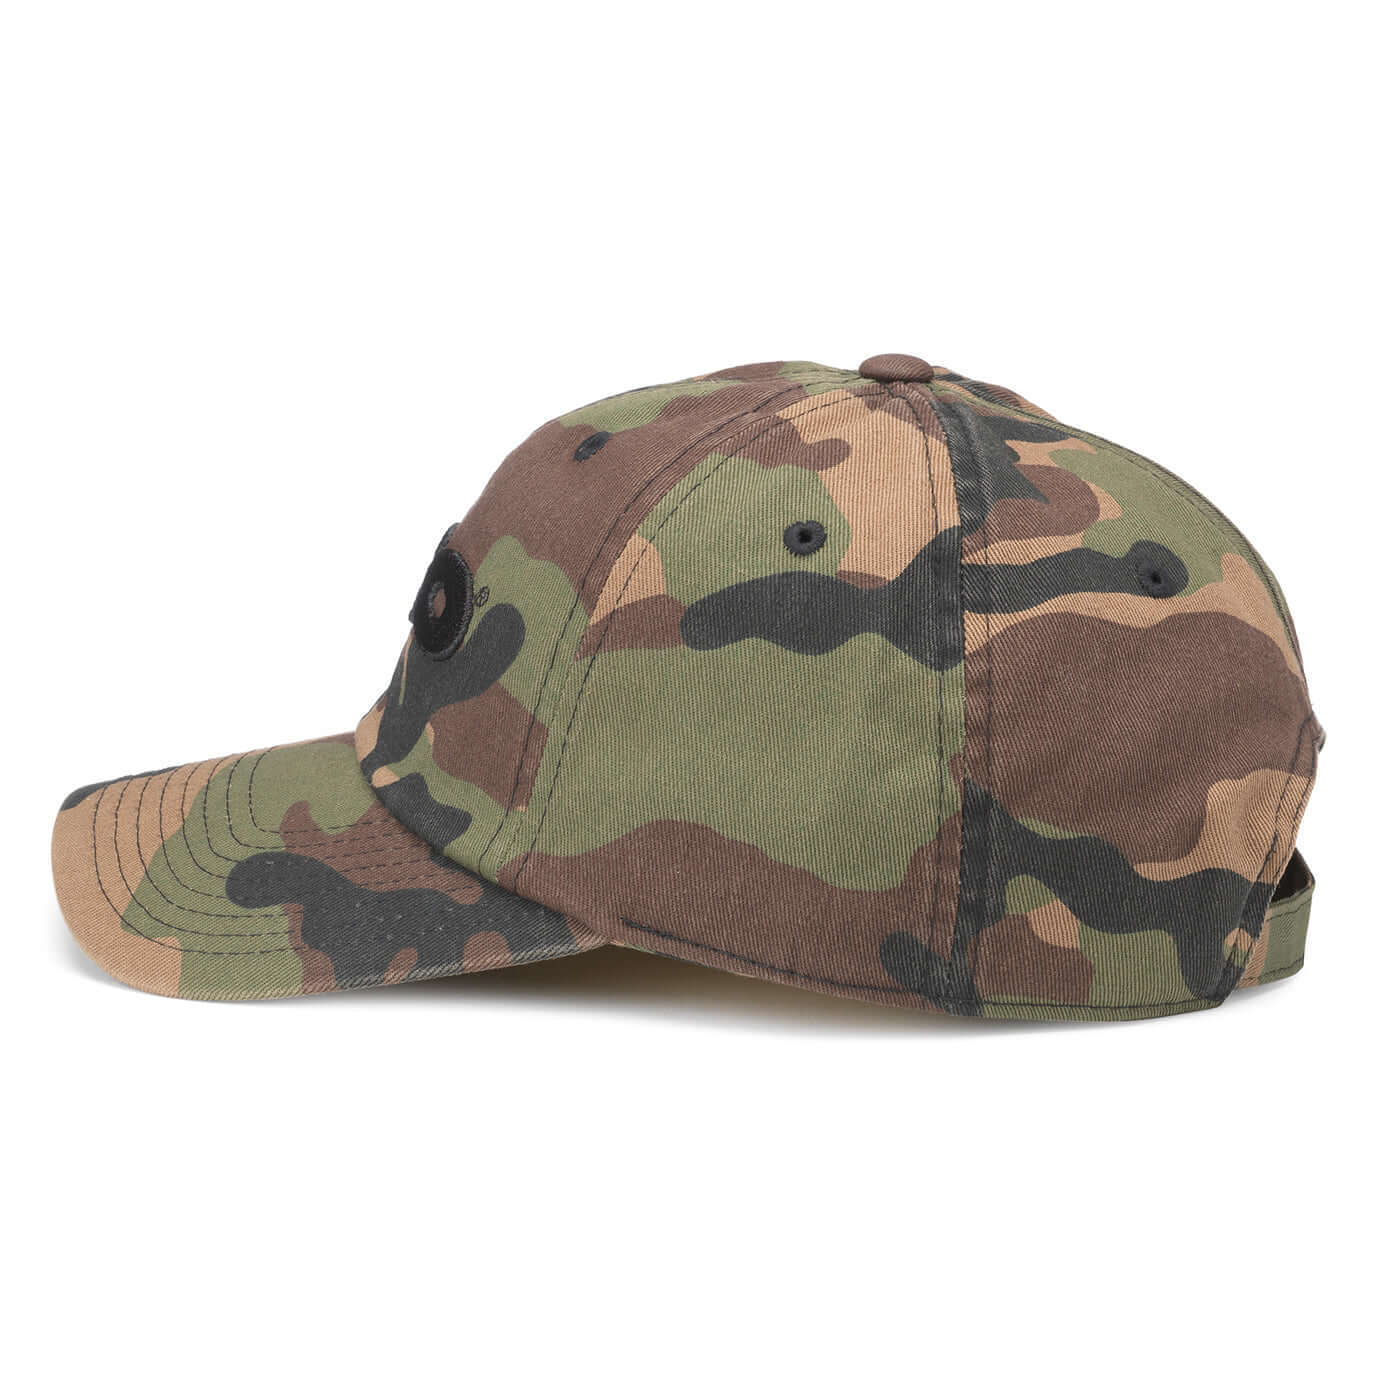 TKO Strength & Performance Hats: Camo Dad Hat | Workout